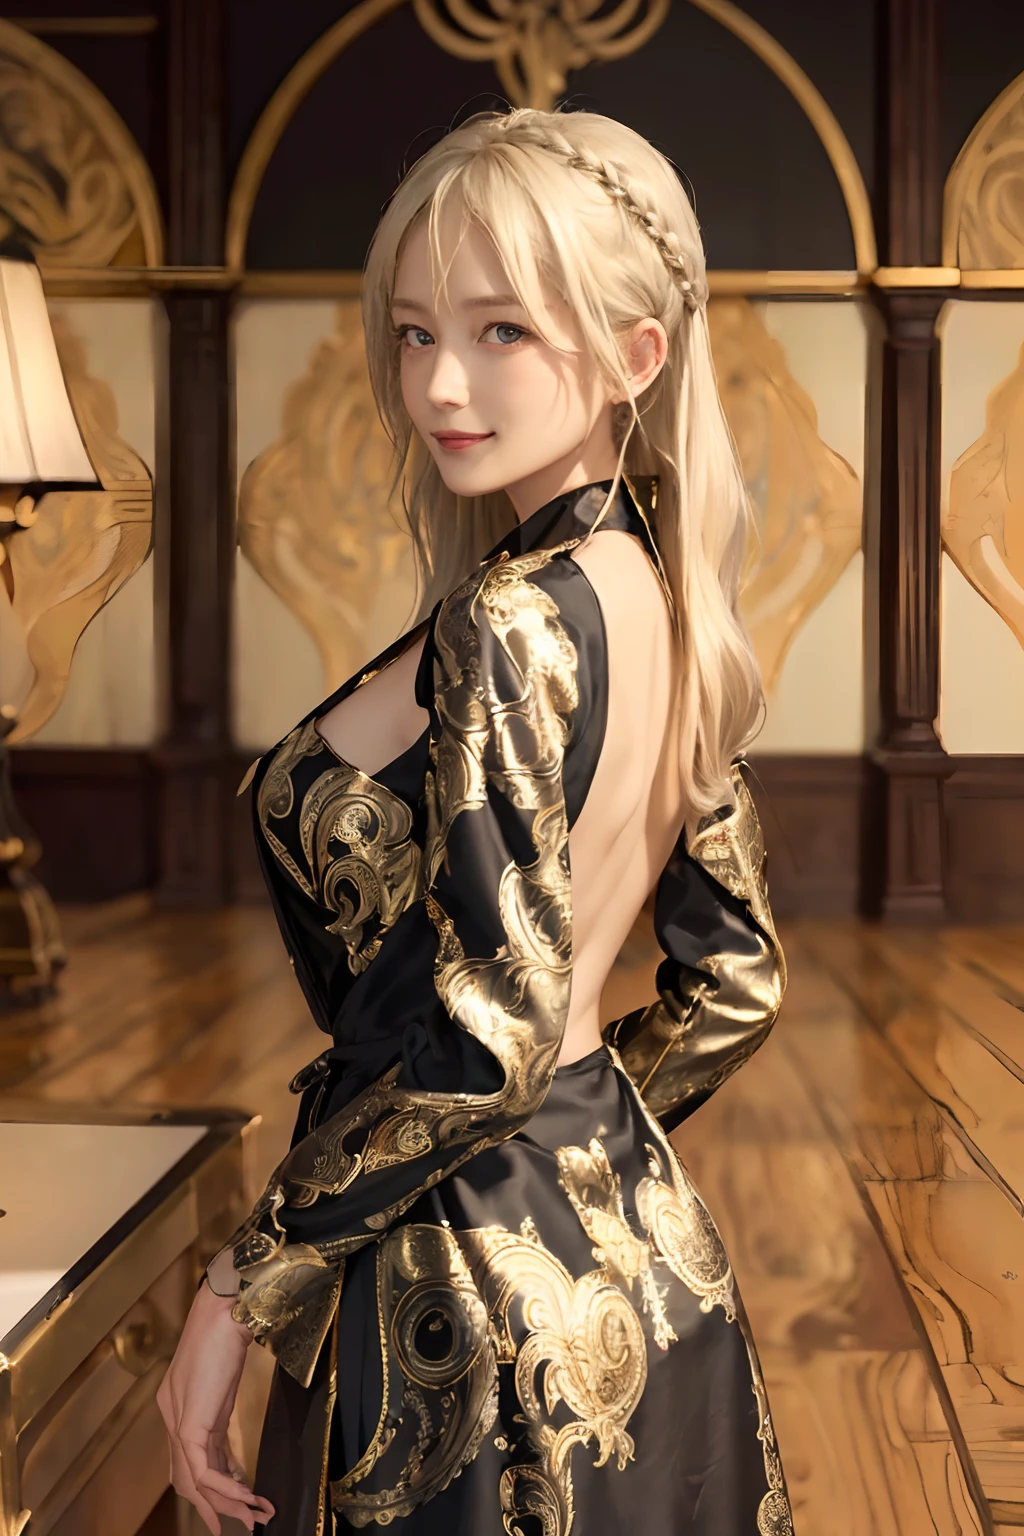 ((top-quality、8K、​masterpiece:1.3)), (Longhaire, Beautiful hairstyle, Platinum Blonde Hair:1.5)、(gold foil, Intricately drawn paisley pattern, Delicate workmanship, Black and orange fabric:1.4, maid dress:1.5), Clear, Fine-grained skin、Beautiful clear eyes、cleavage of the breast、Carefree and natural smile、(Hair disheveled in the wind:1.3)、Beautiful girl with a smile、(thin-waist:1.3)、(Dynamic and provocative poses:1.2)、(Backshots)